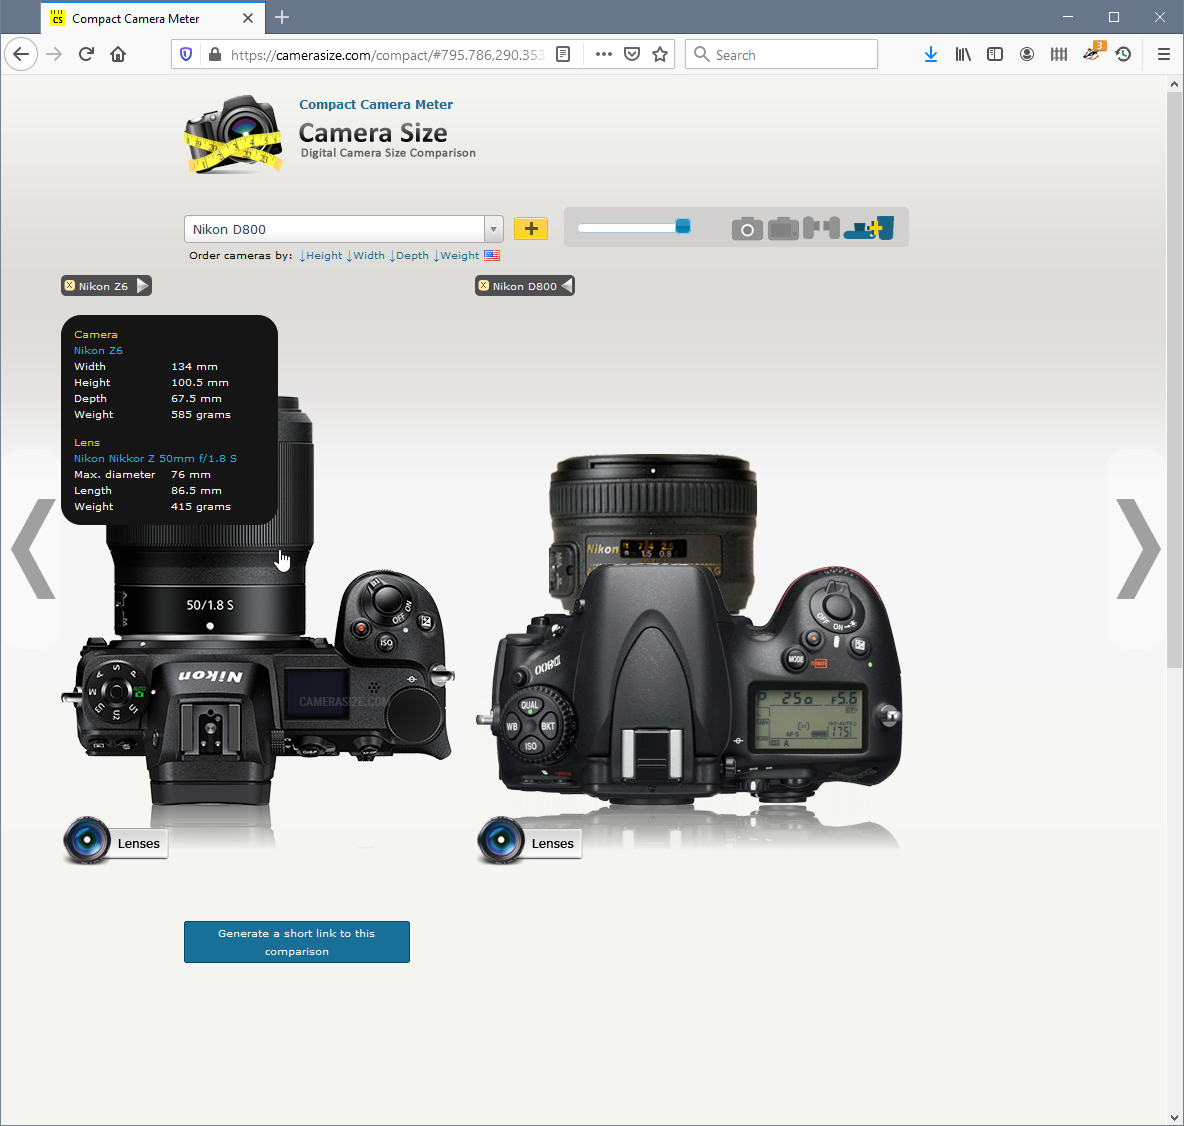 Compact-Camera-Meter-Mozilla-Firefox-2020-04-27-14-02-36.png